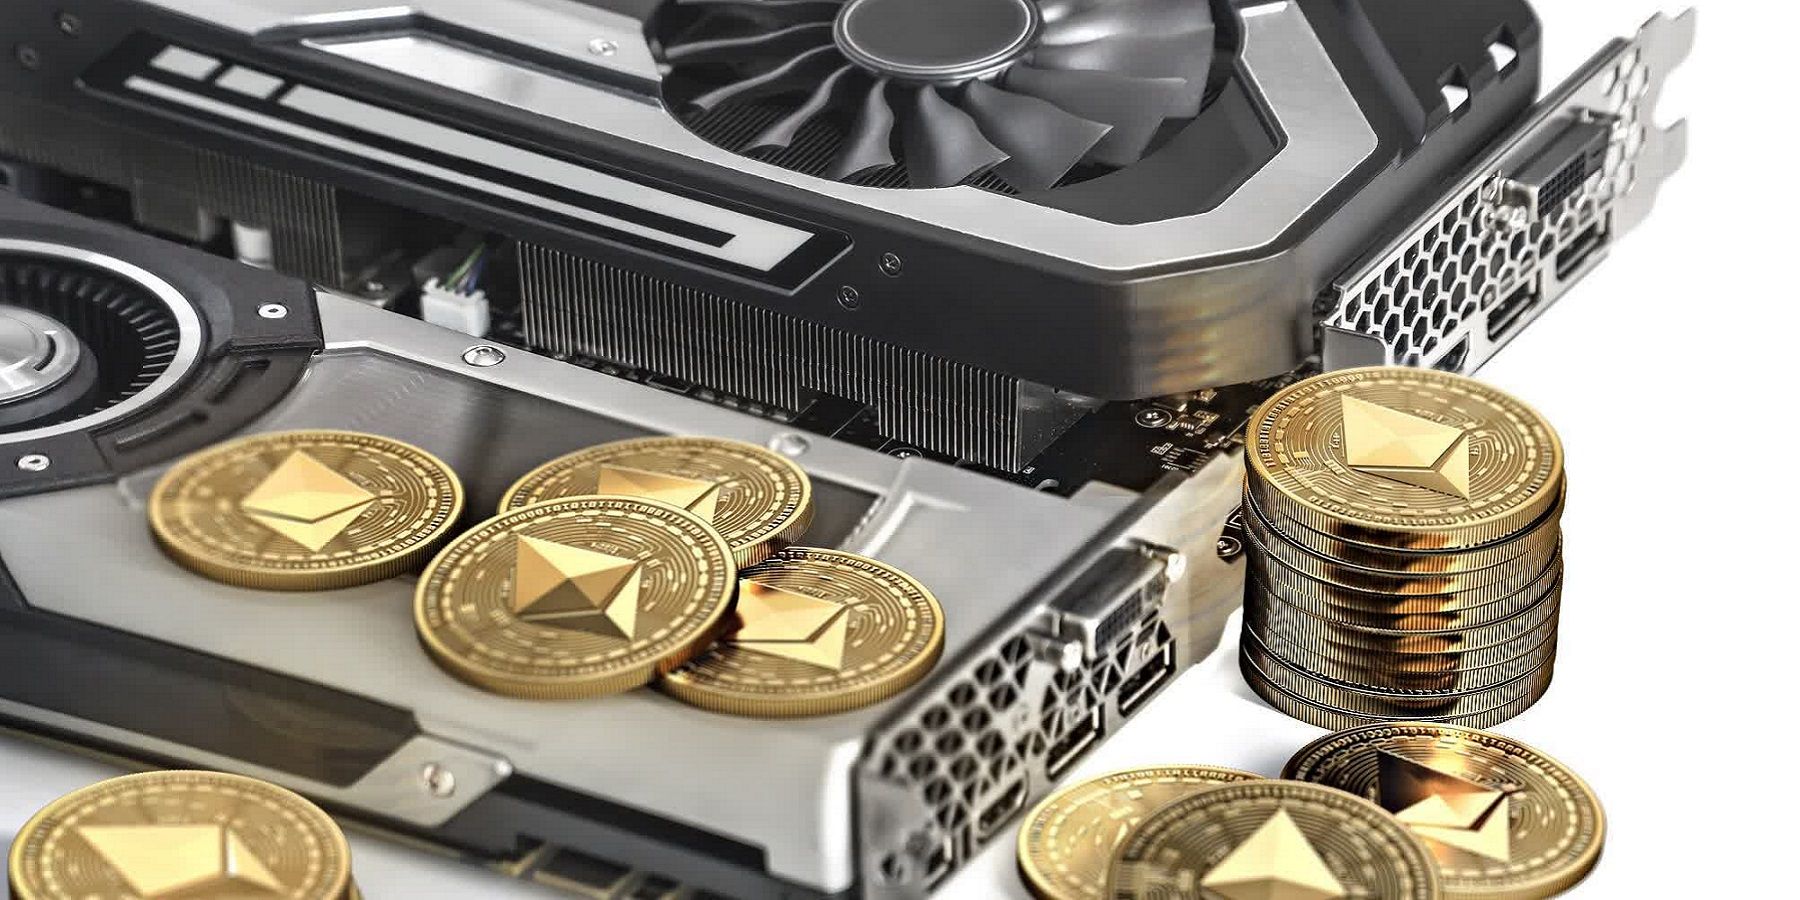 A close-up of an Nvidia GPU with some coins added.